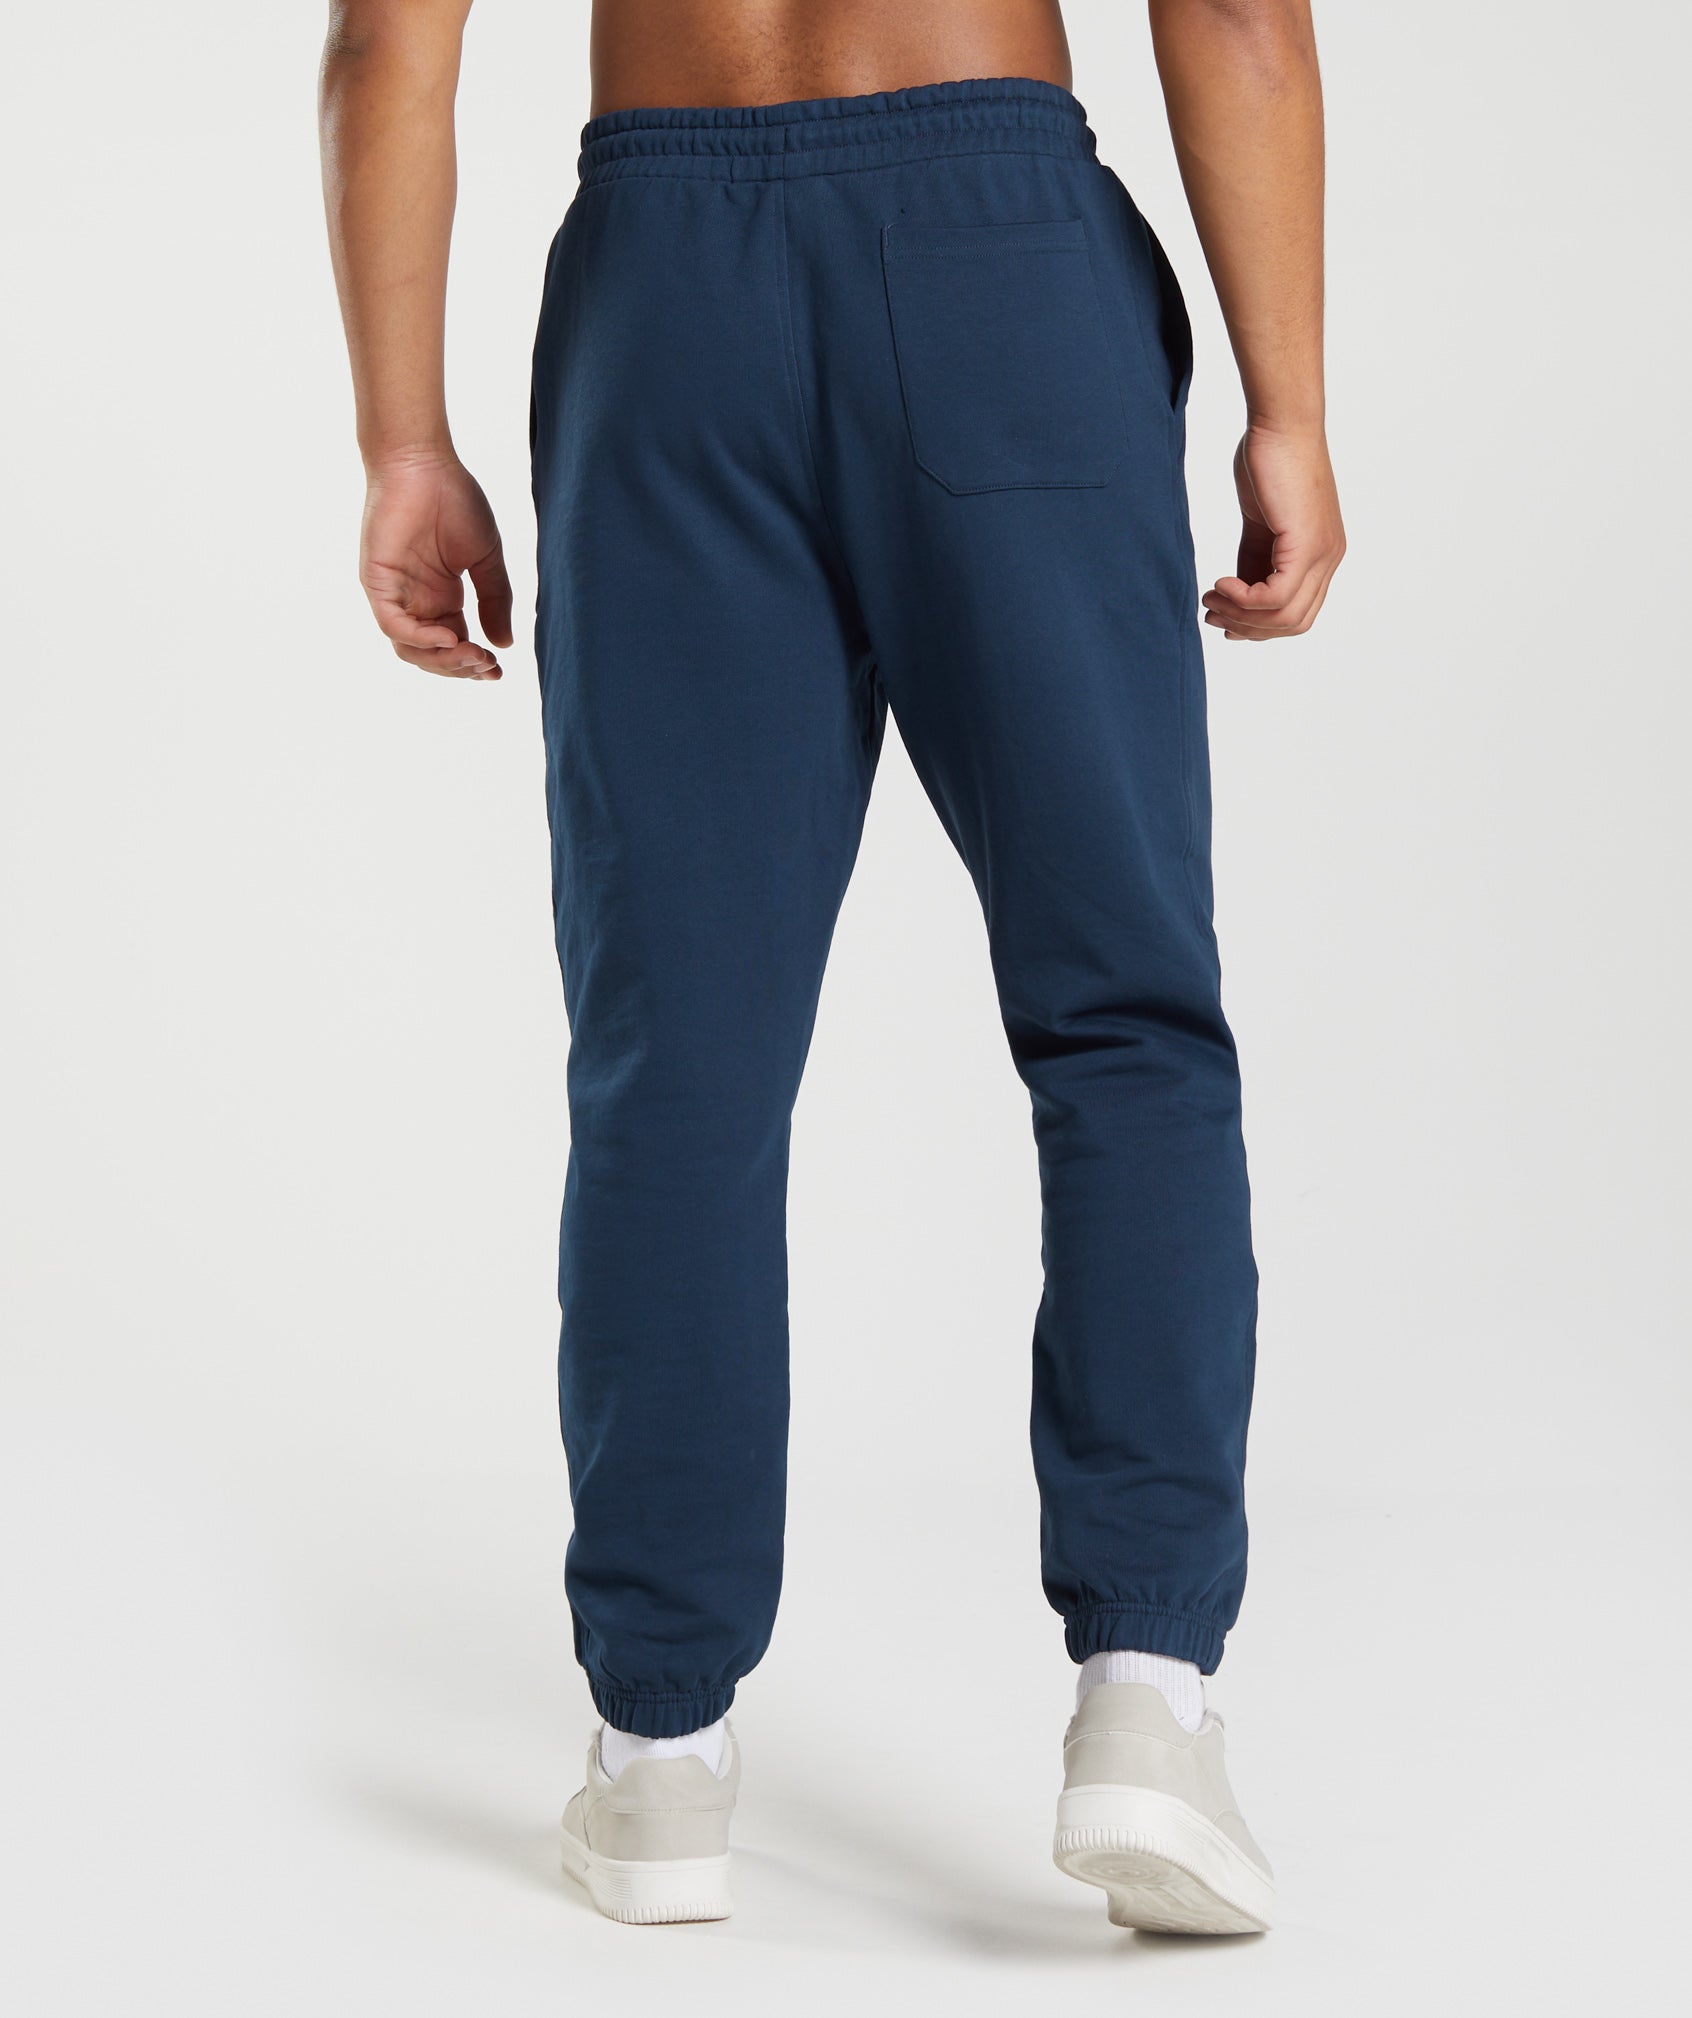 Rest Day Sweats Joggers in Navy - view 3